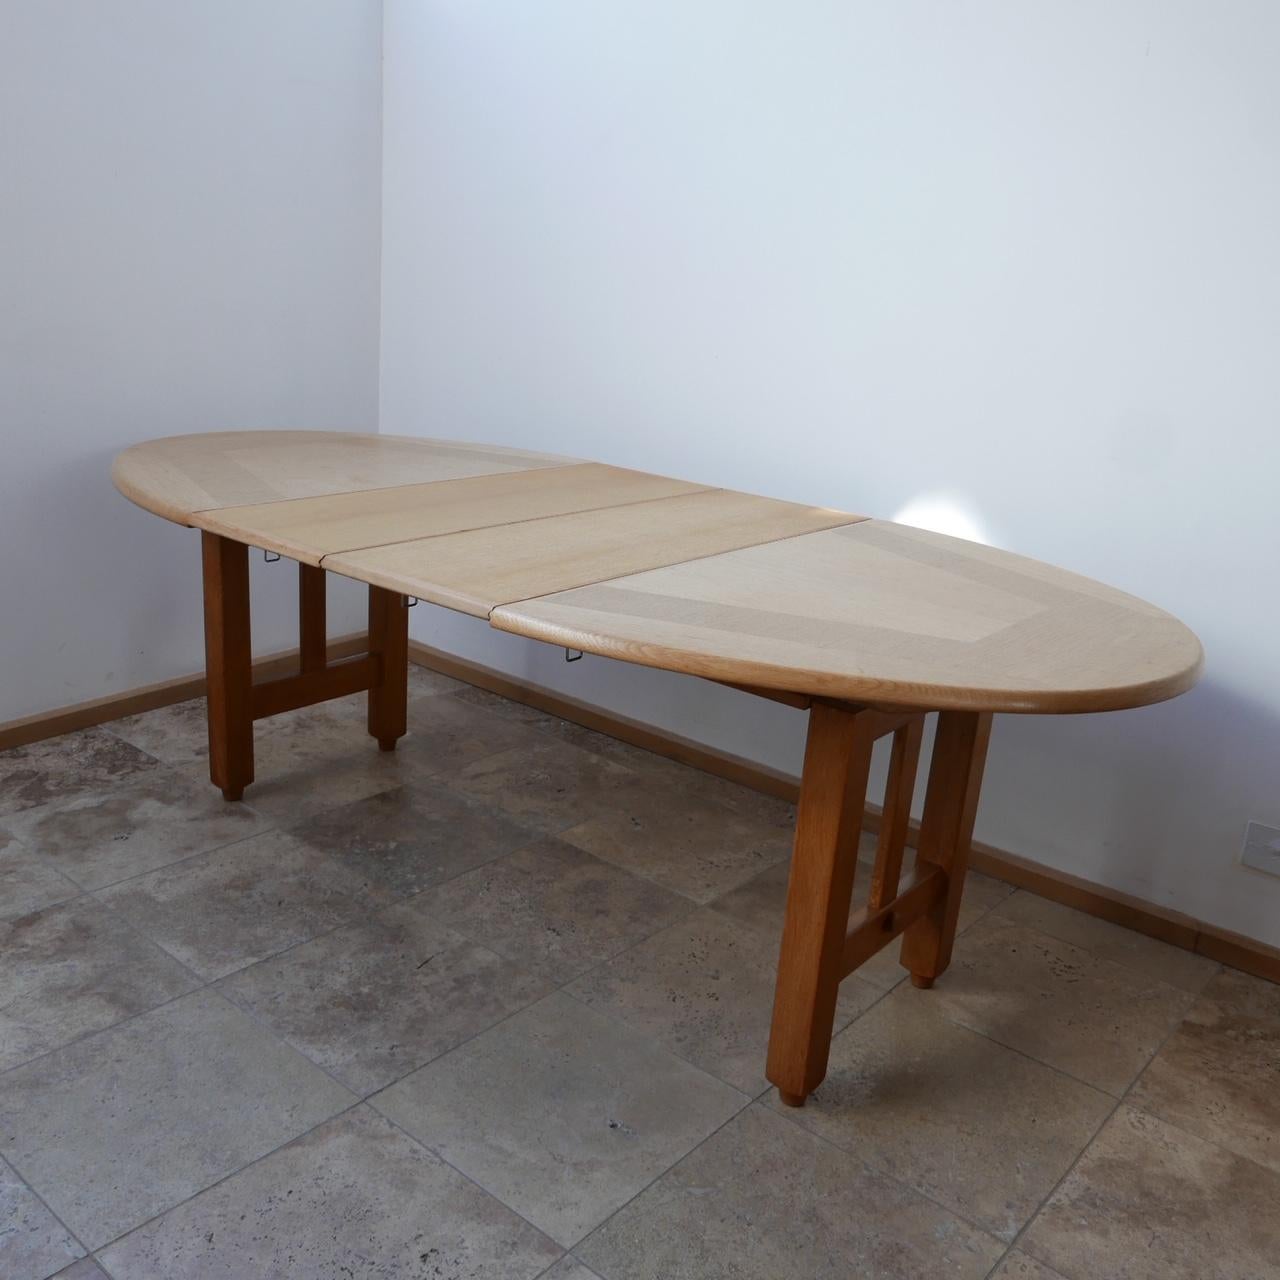 An adjustable dining table by design legends Guillerme et Chambron. 

France, c1970s. 

Two optional extendable leaves. 

Good vintage condition. 

The leaves add 35 cm per leaf. So up to 70 total extension. 

Dimensions: 74 H x 103 D x